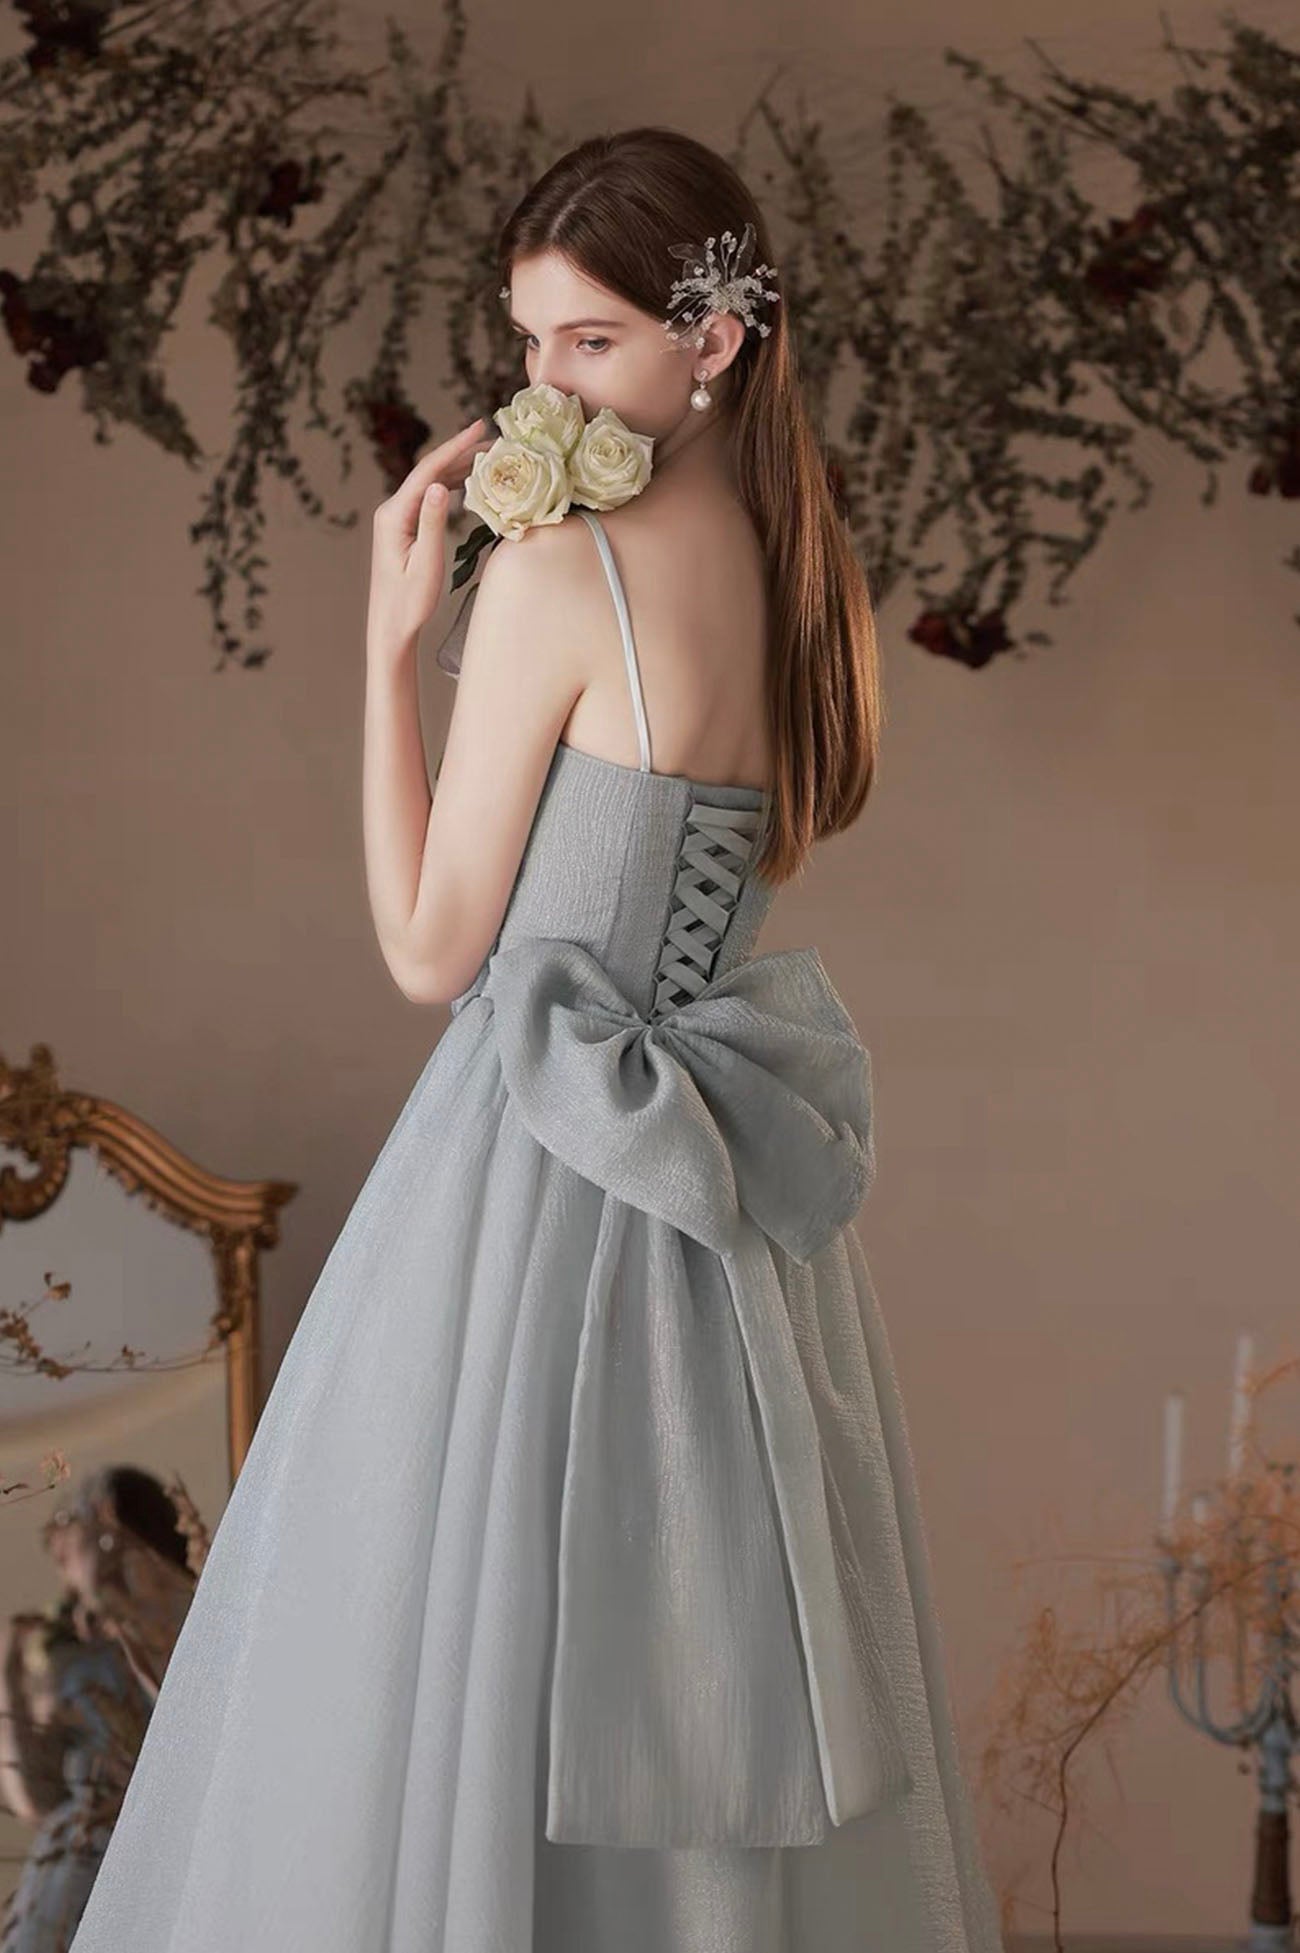 Gray Tulle Long A-Line Prom Dress with Bow, Lovely Graduation Dress